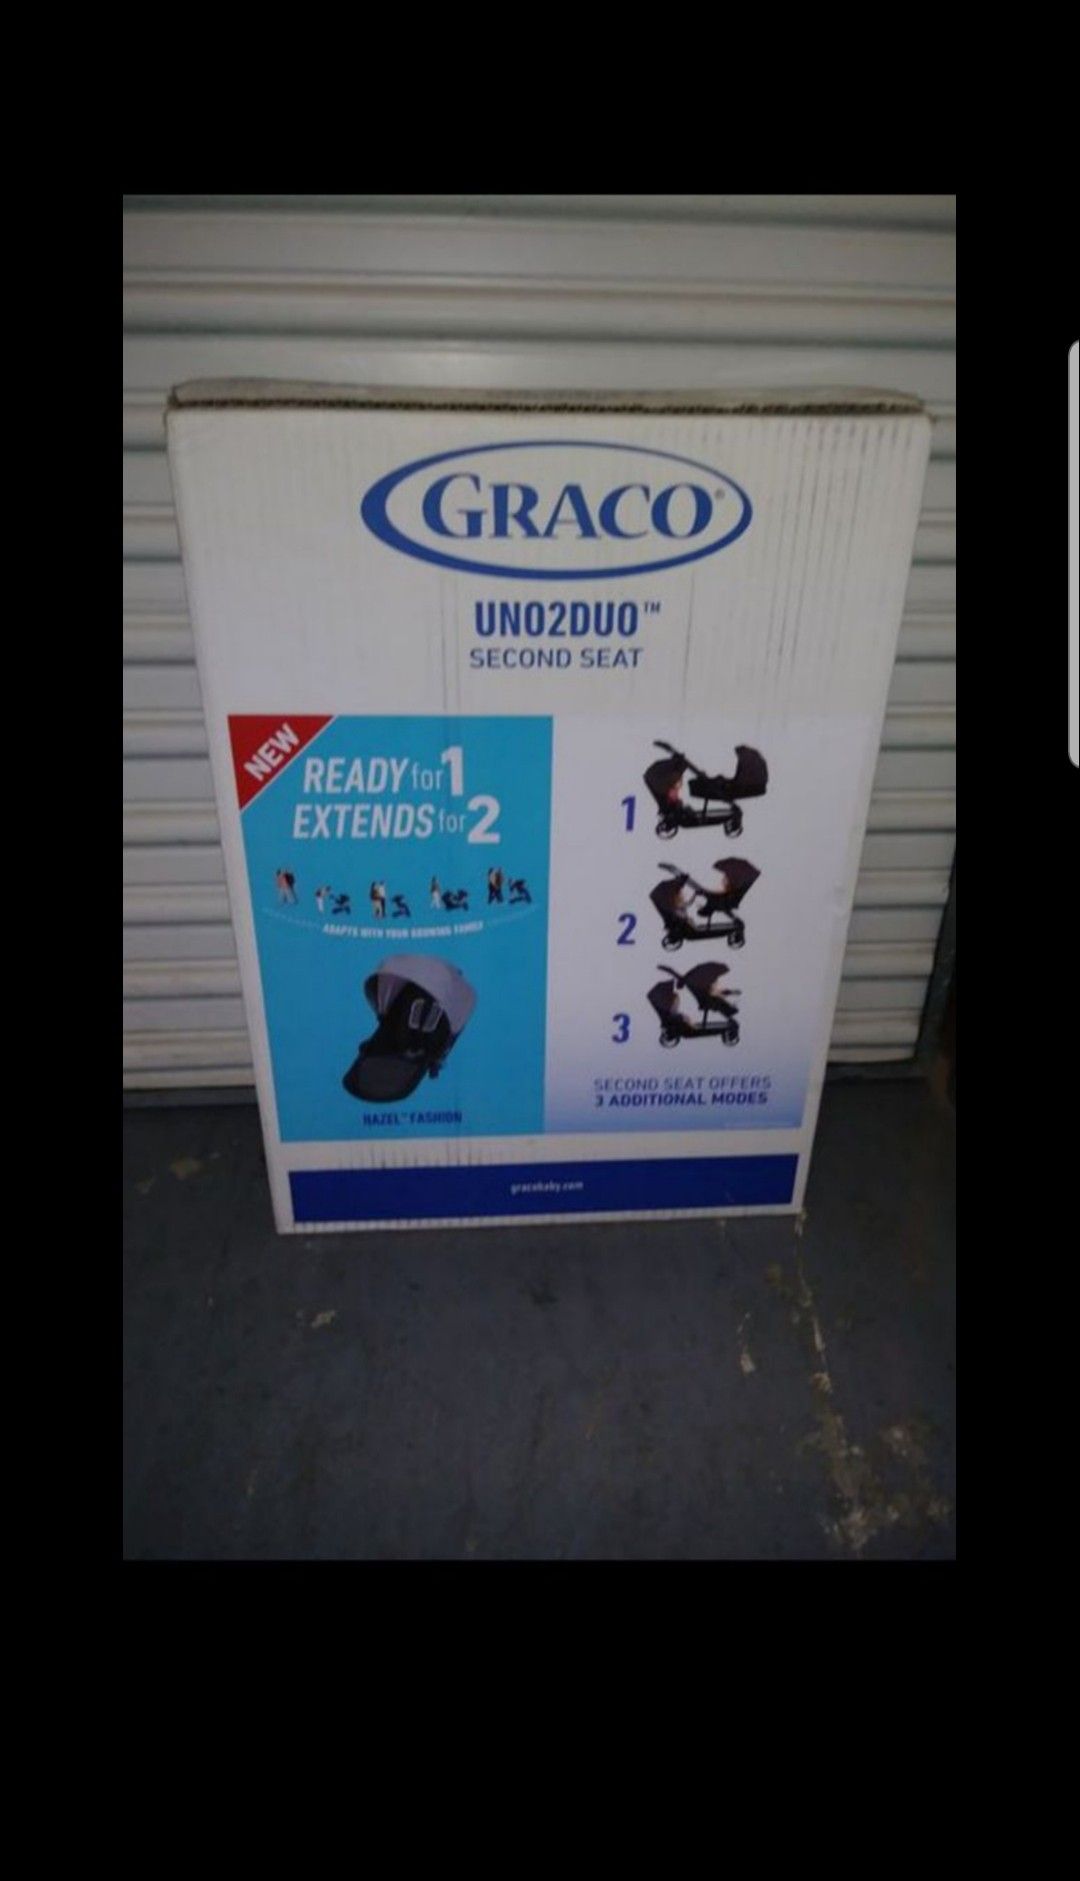 NEW IN BOX GRACO UNO2DUO SECOND SEAT for Uno2duo single to double stroller (this is the 2nd seat and attaches to stroller)